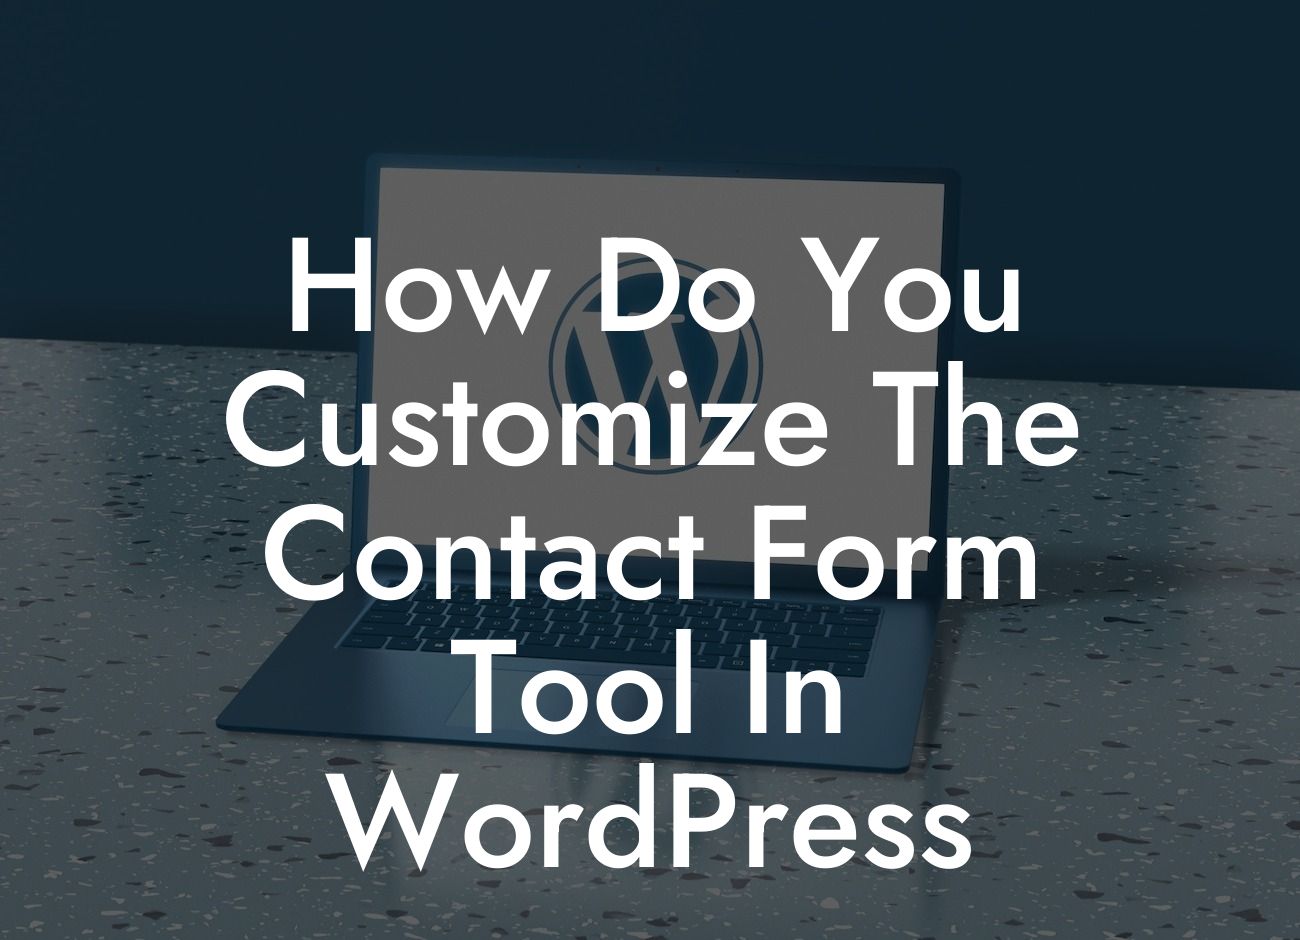 How Do You Customize The Contact Form Tool In WordPress